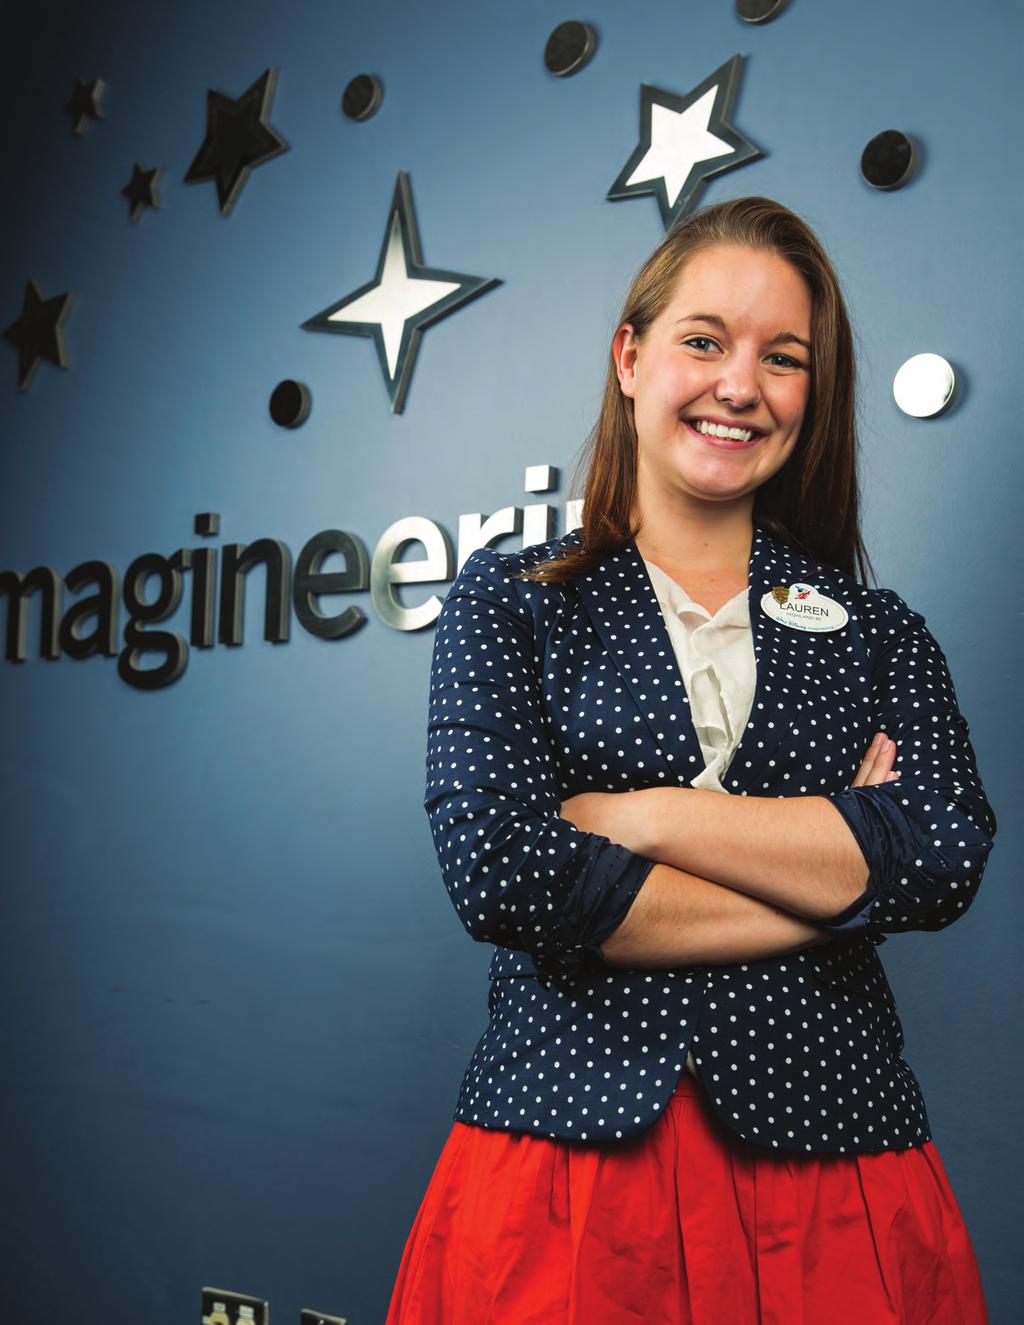 ALUMNA ENGINEERING A DREAM Lauren Murphy, 12, wanted to be a Walt Disney Imagineer from the age of five. Becoming a National Merit Scholar gave her a lot of options when selecting a university.